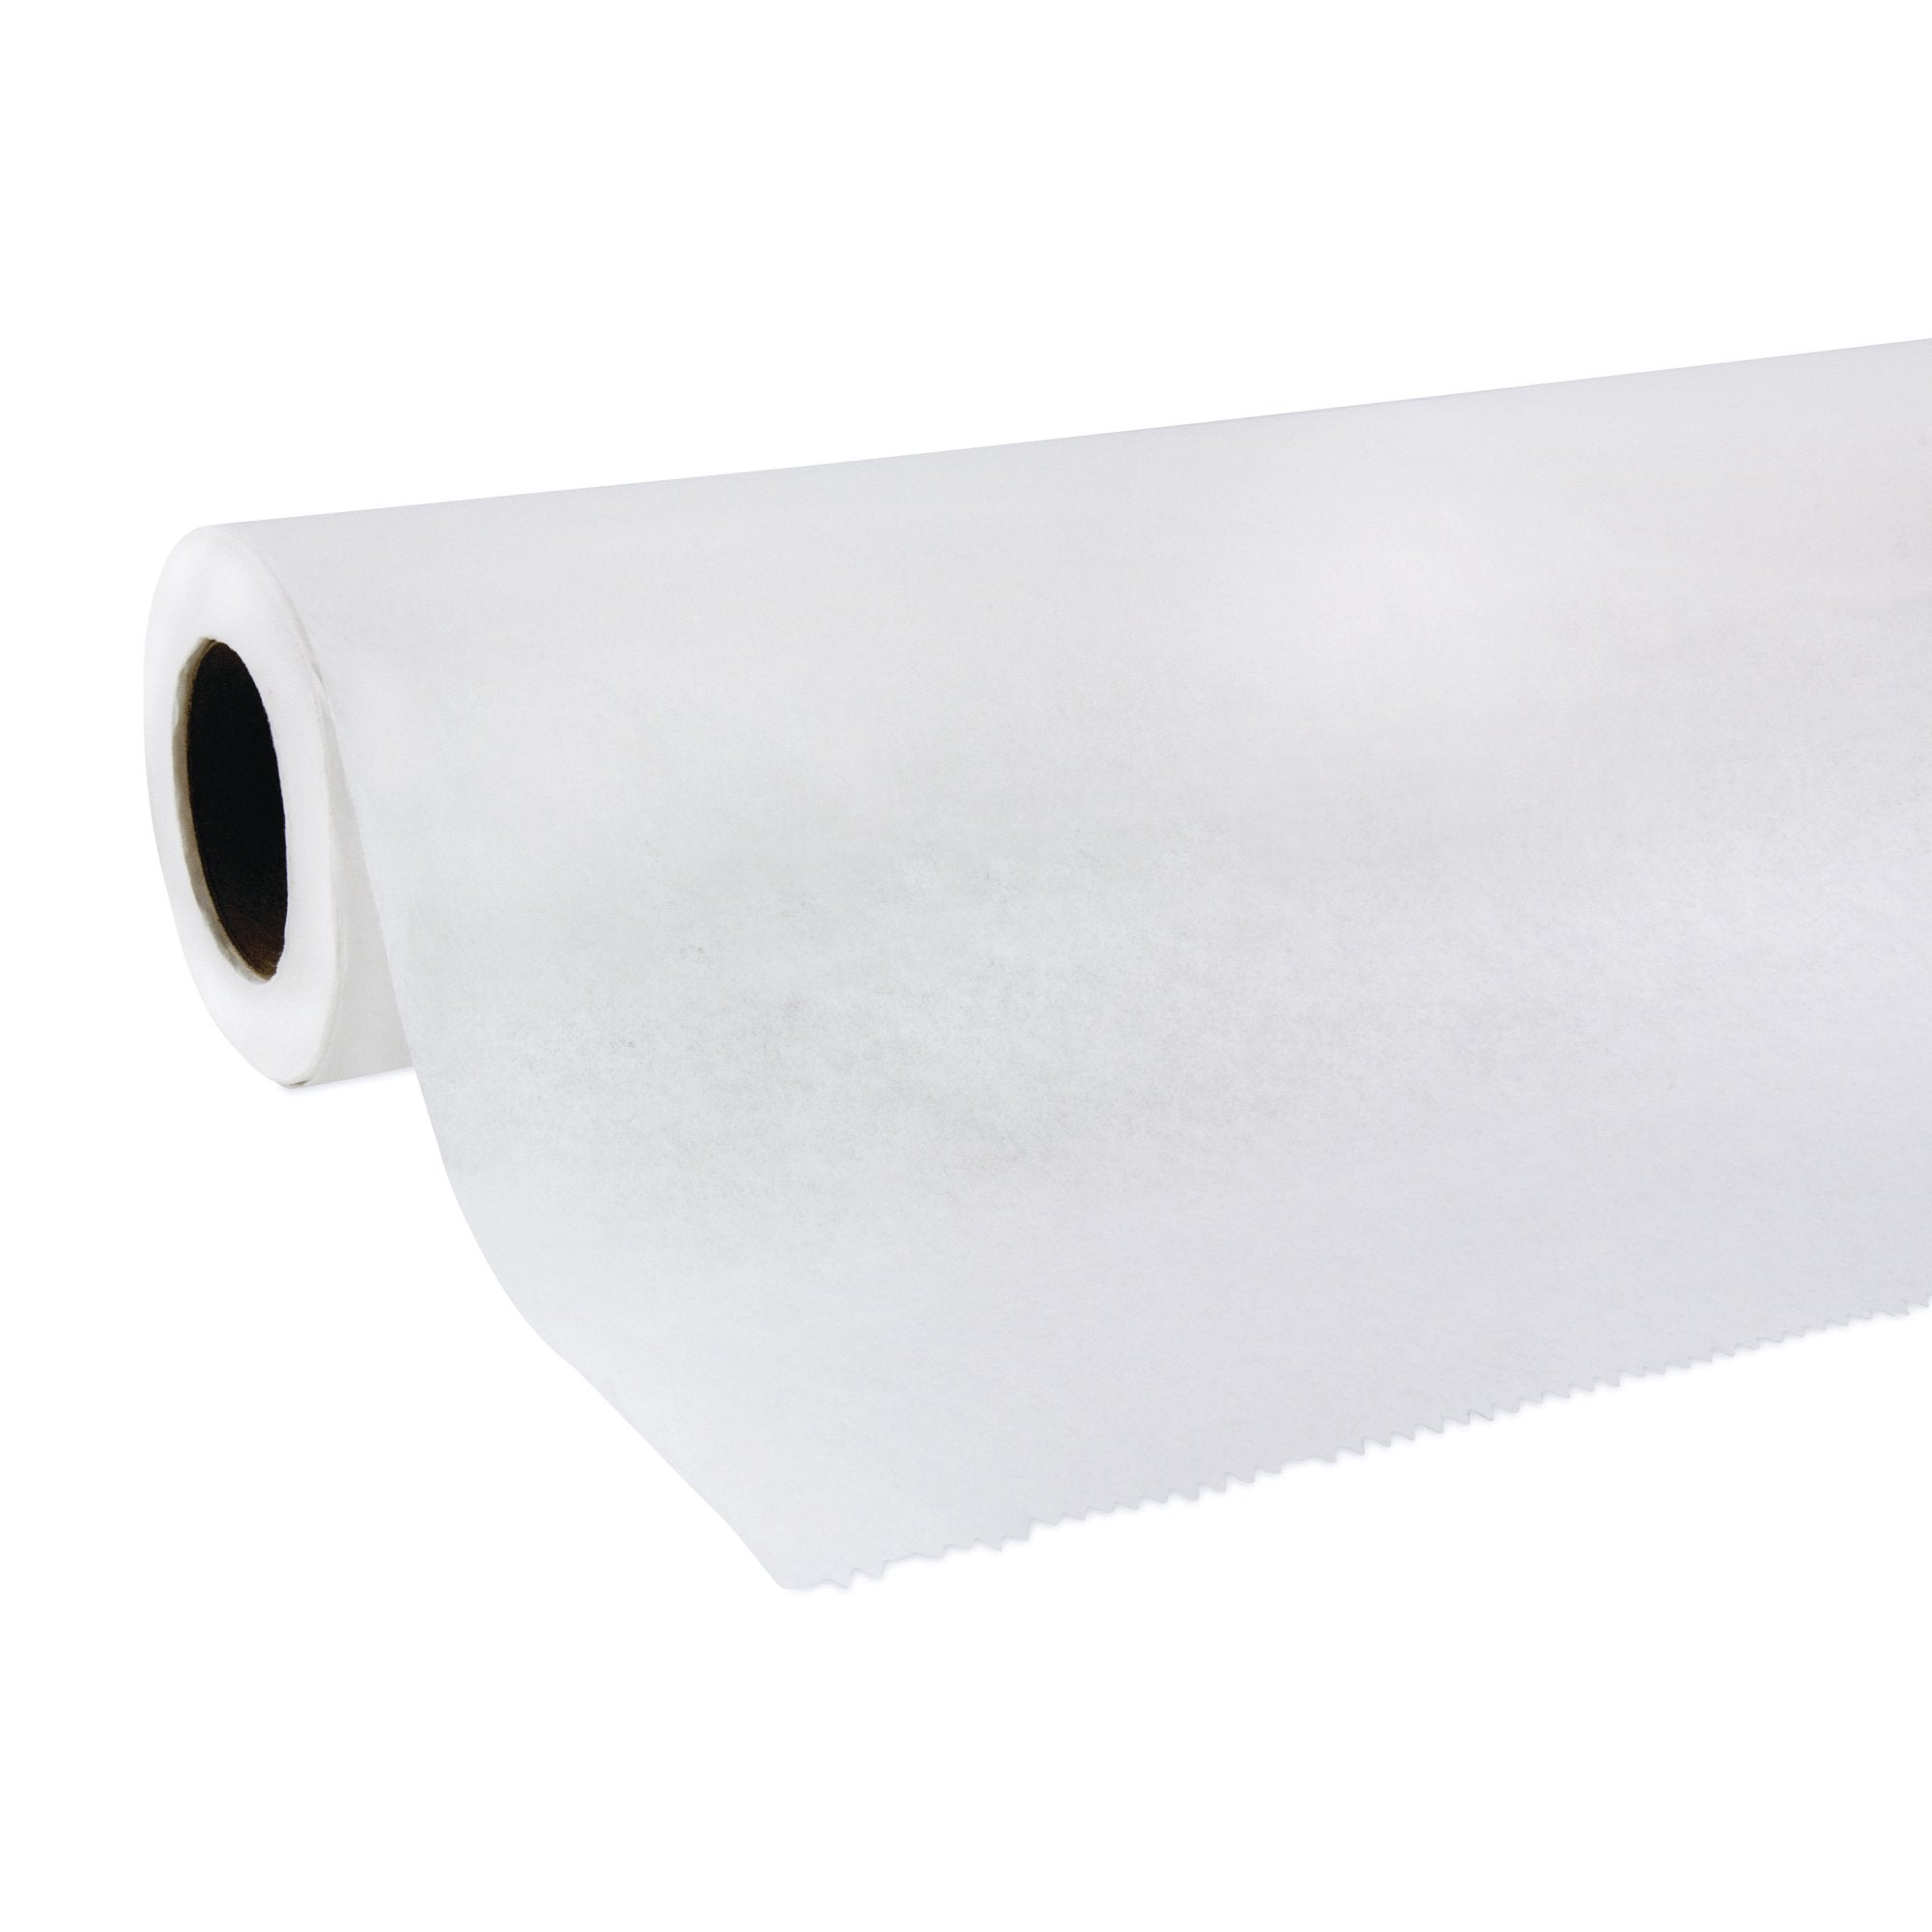 Table Paper McKesson 21 Inch Width White Smooth